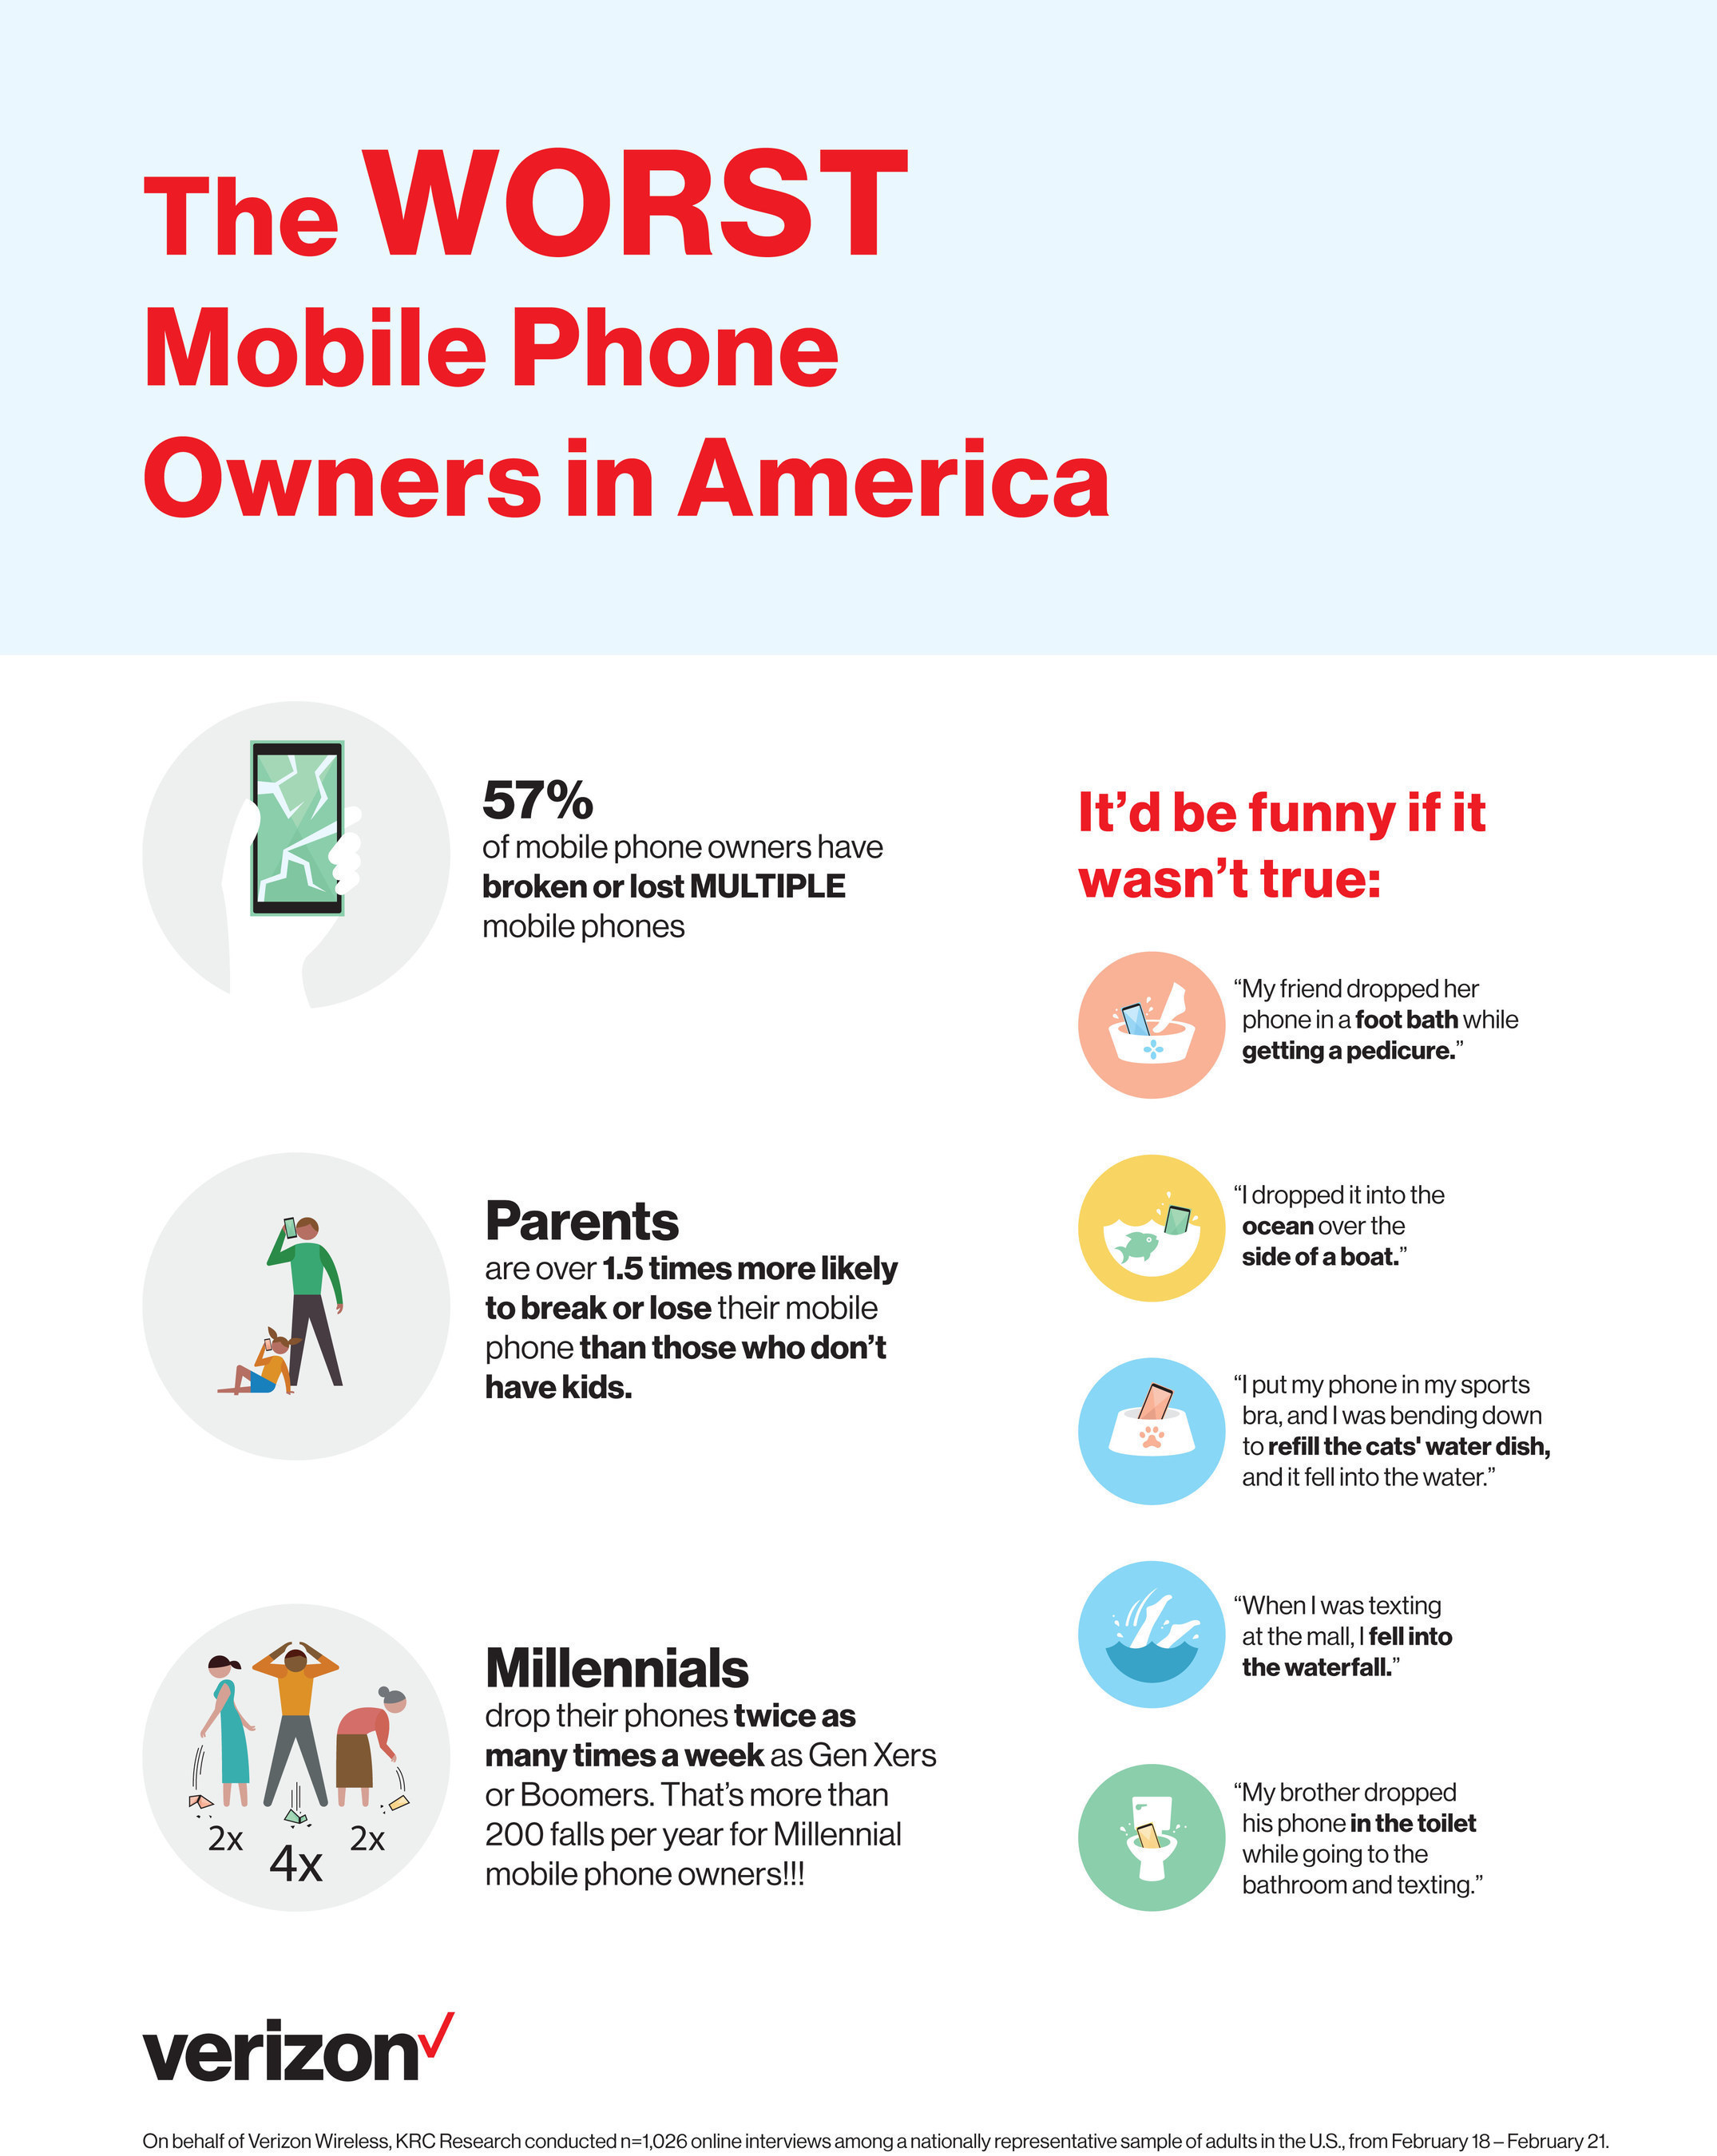 The Worst Mobile Phone Owners in America